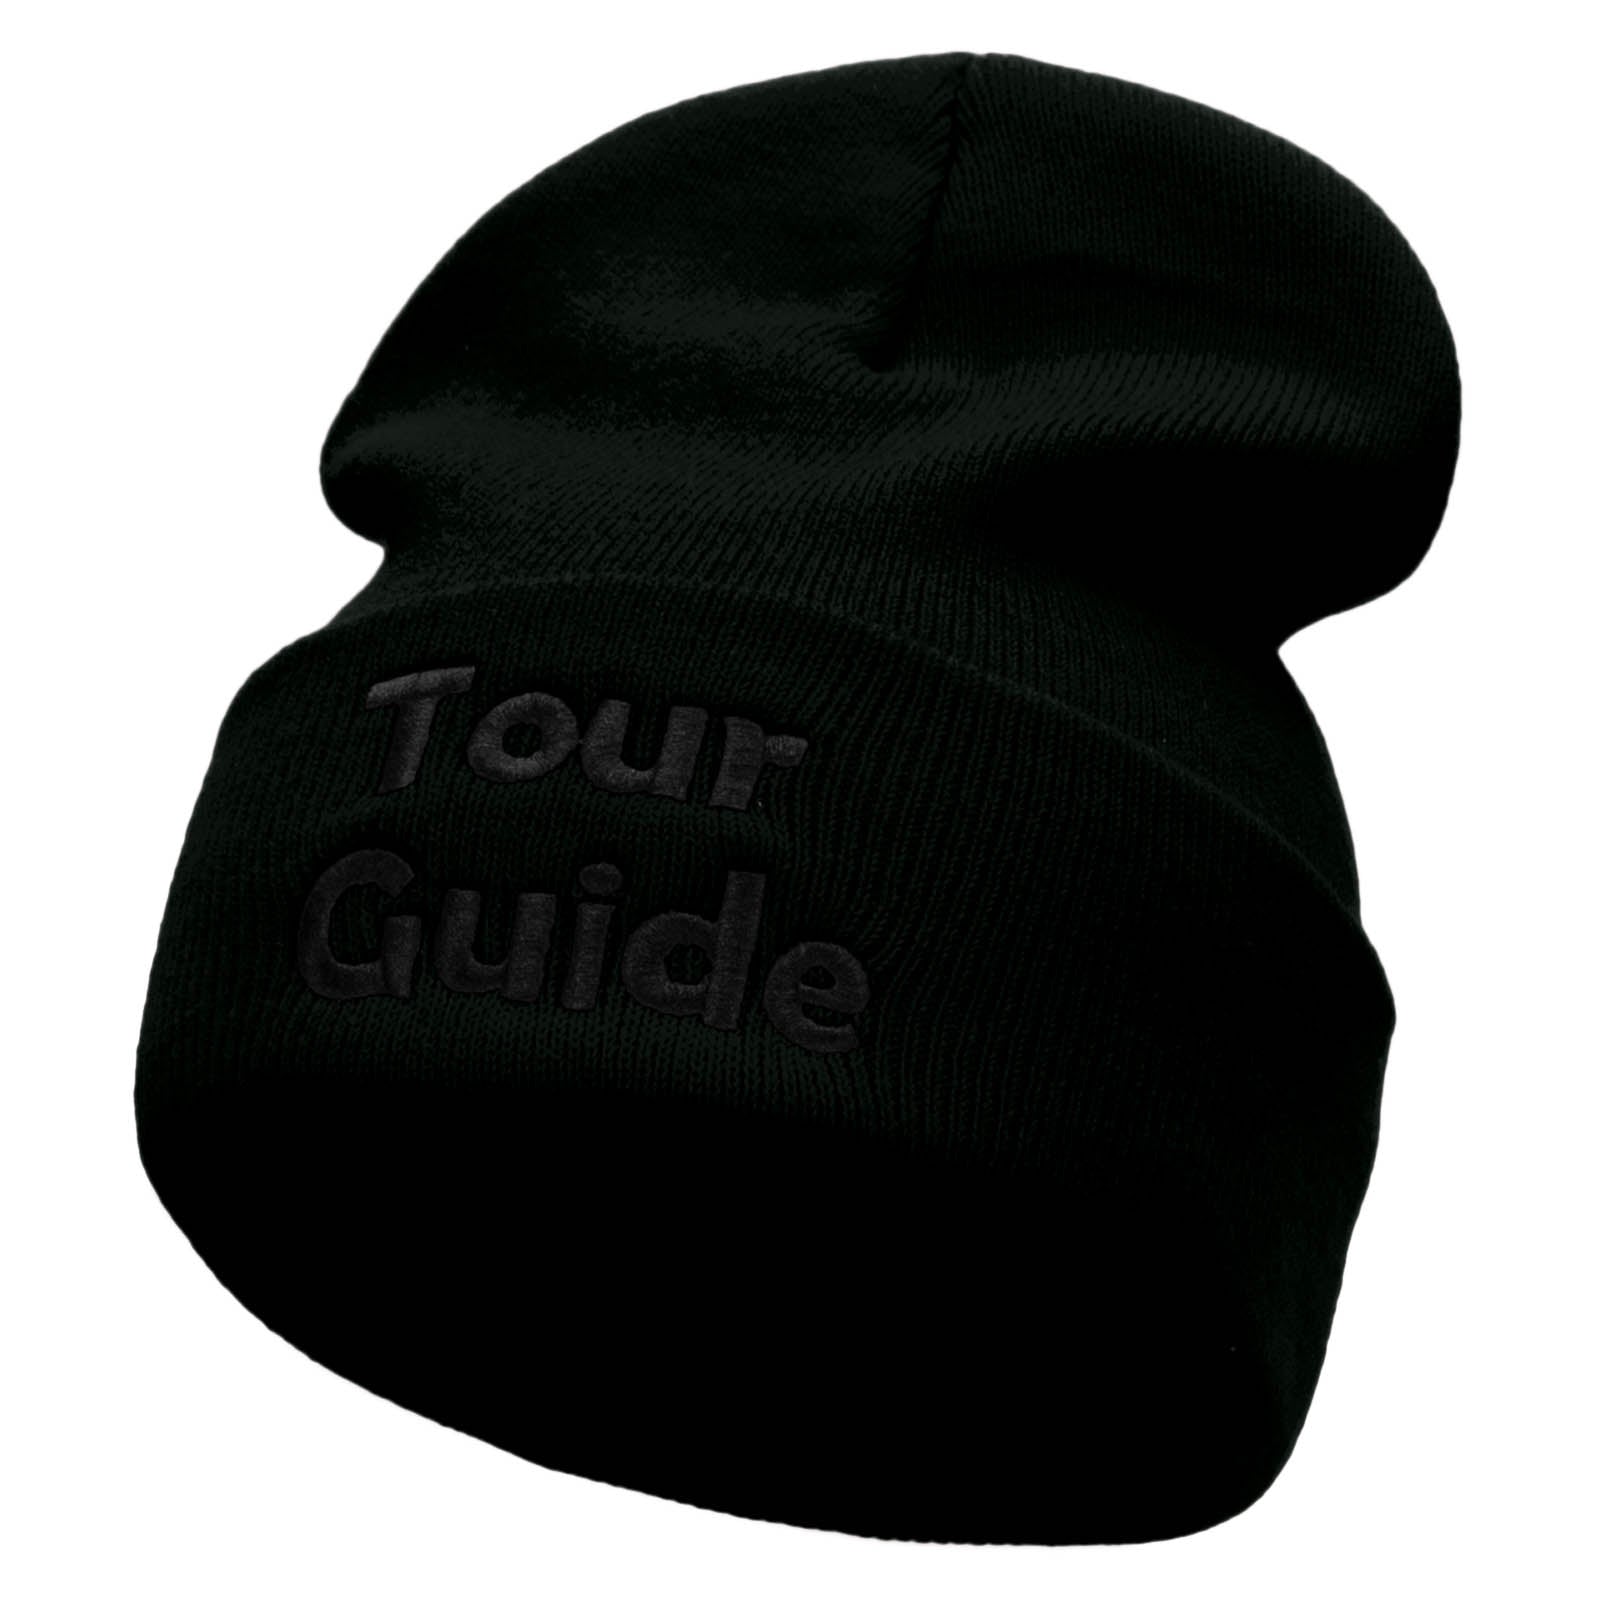 Your Favorite Tour Guide Embroidered 12 Inch Long Knitted Beanie - Black OSFM